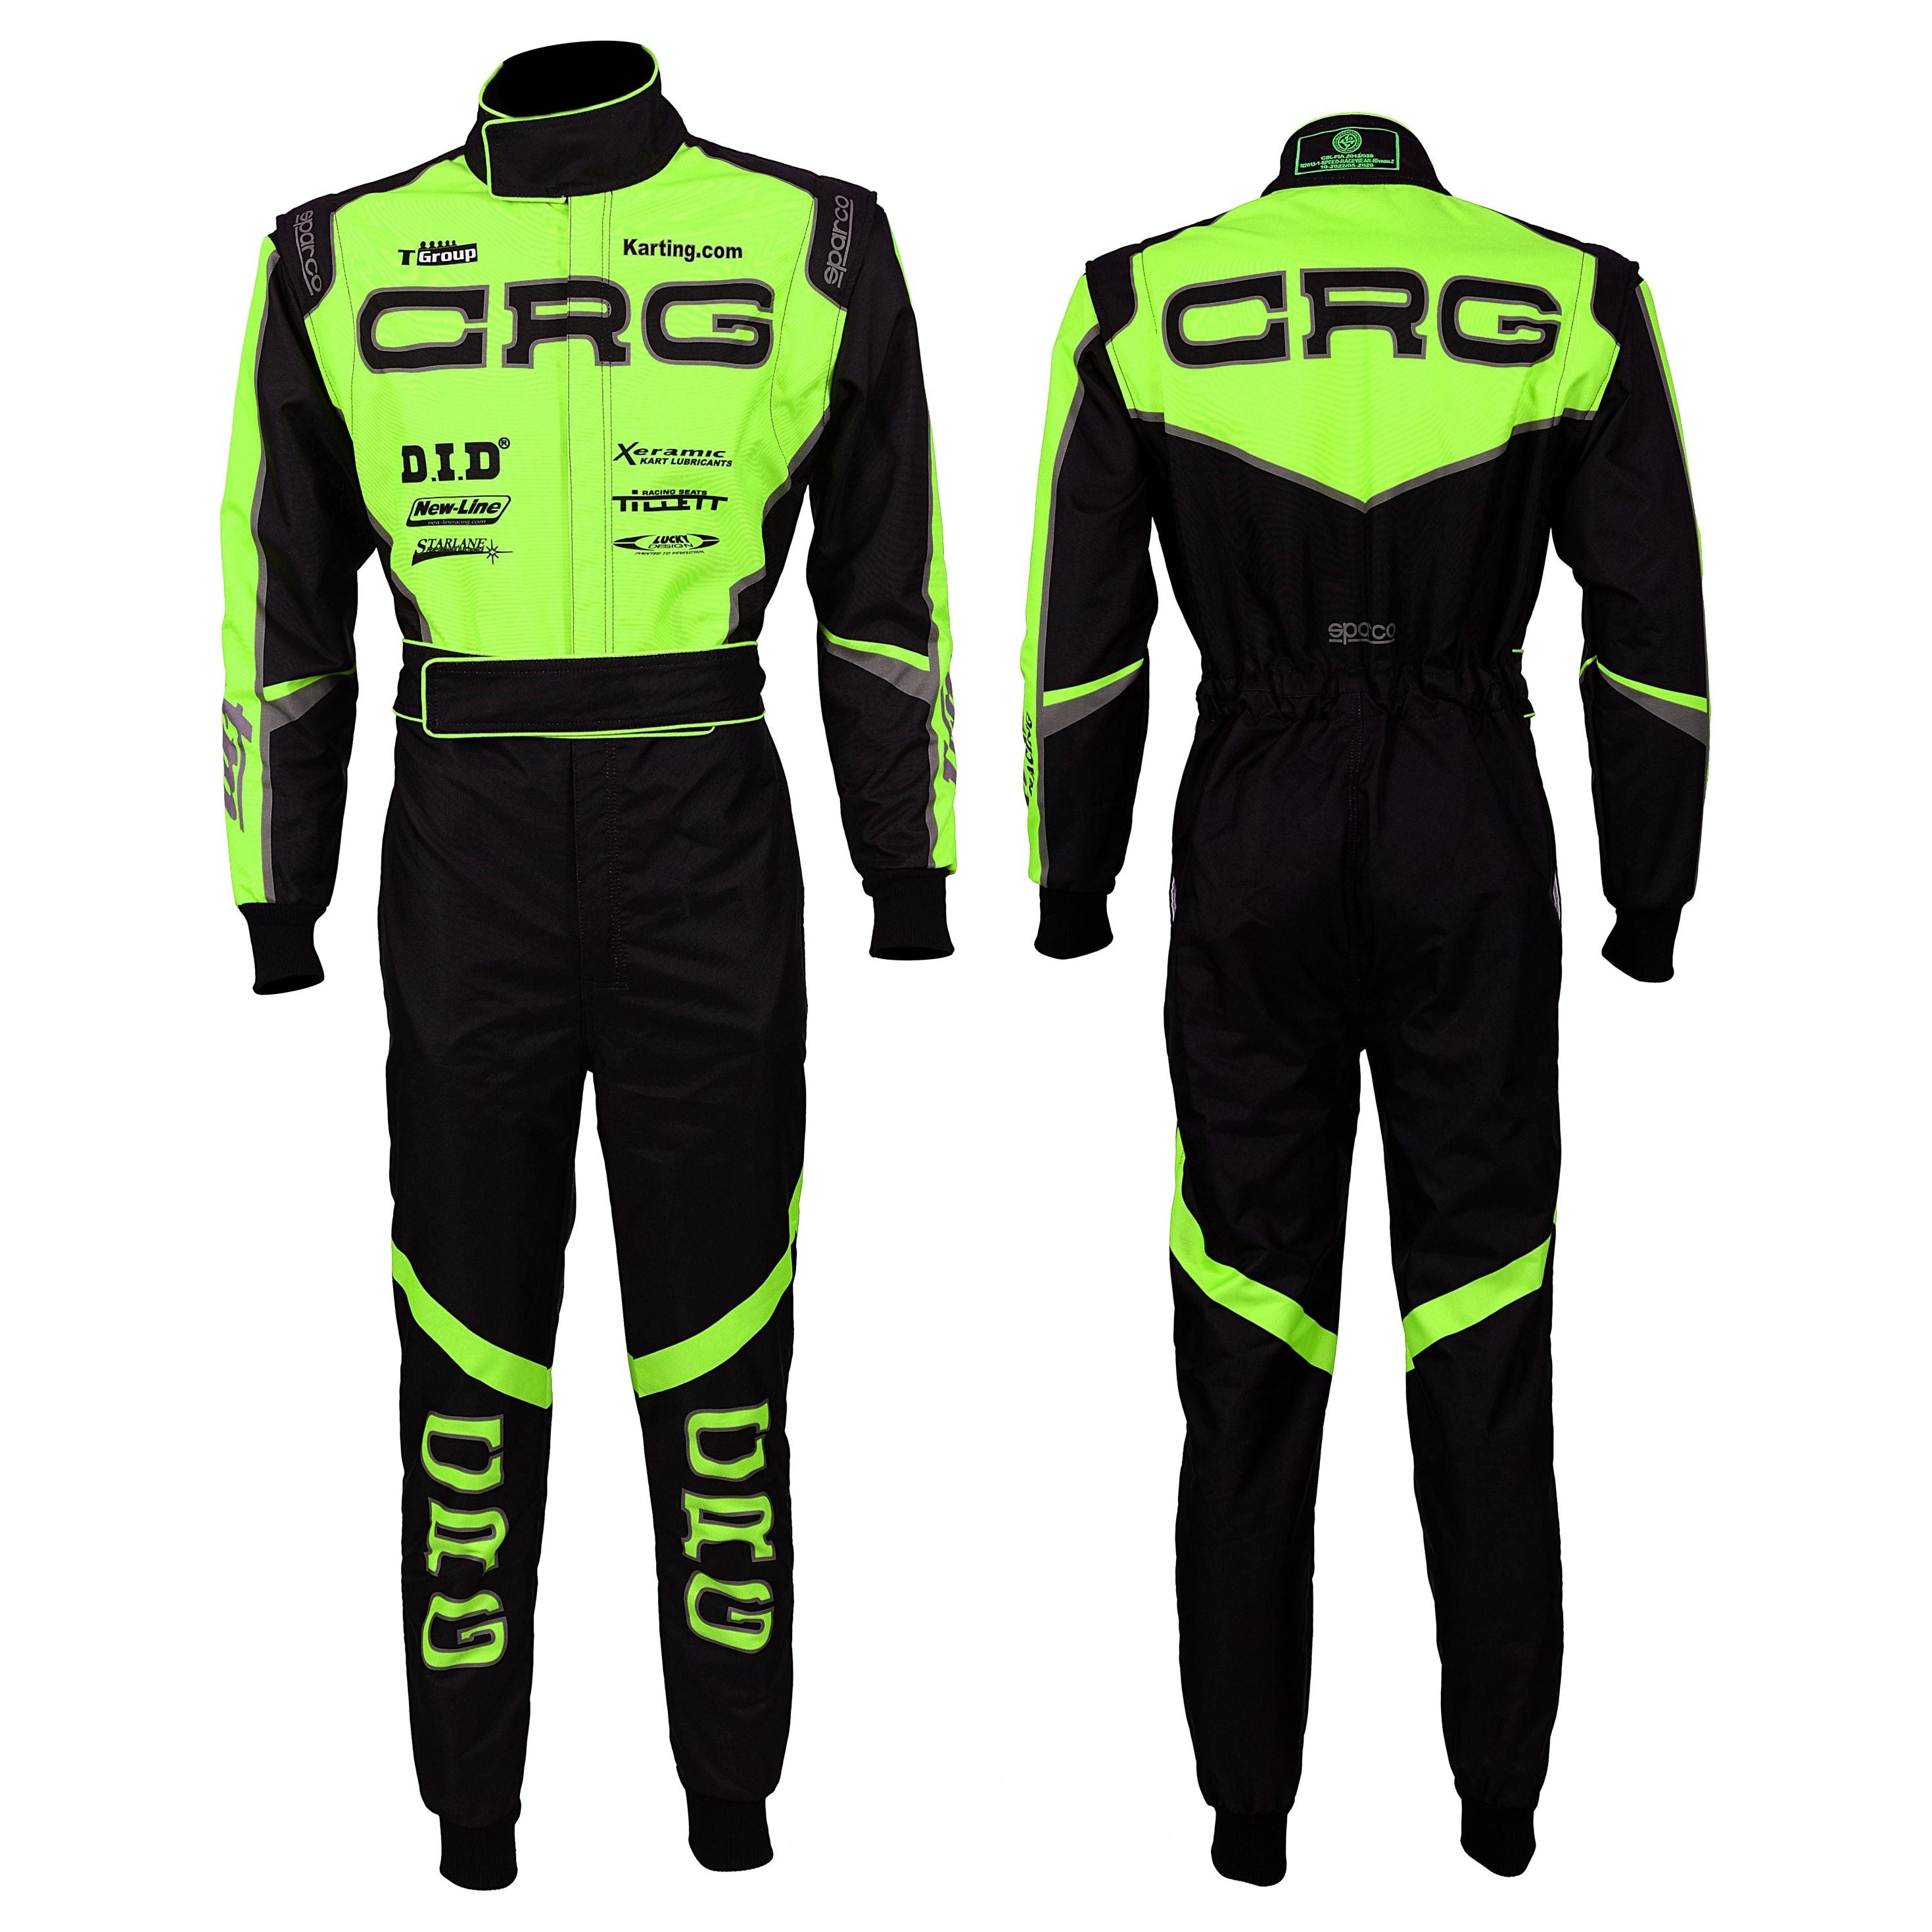 Go kart racing Sublimation Protective clothing Racing gear Suit N-055